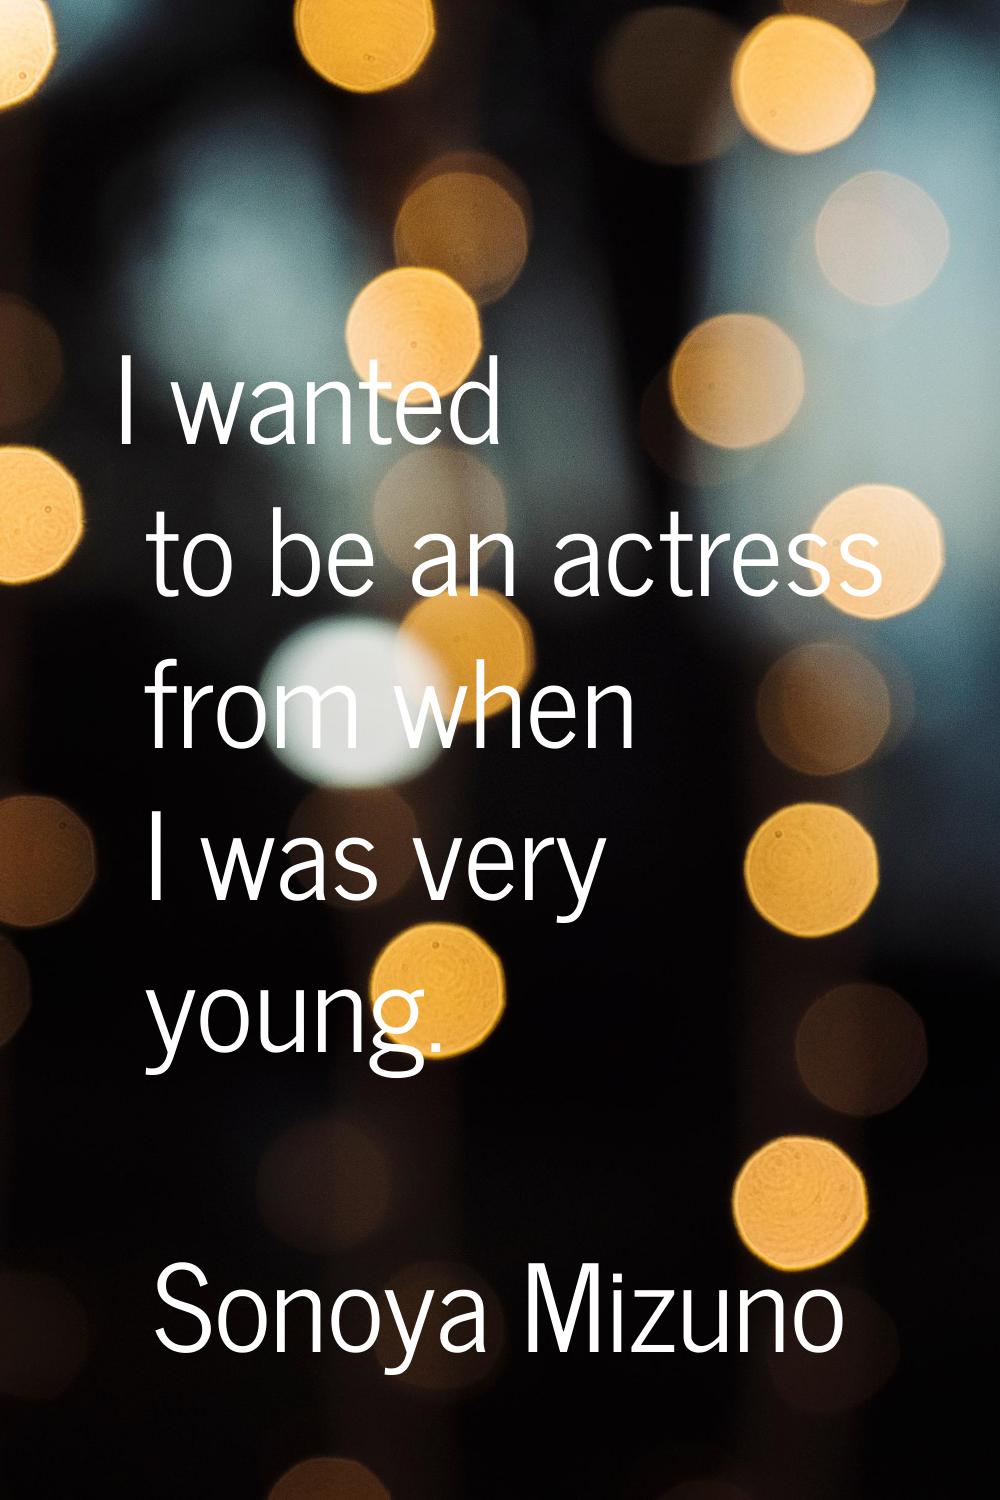 I wanted to be an actress from when I was very young.